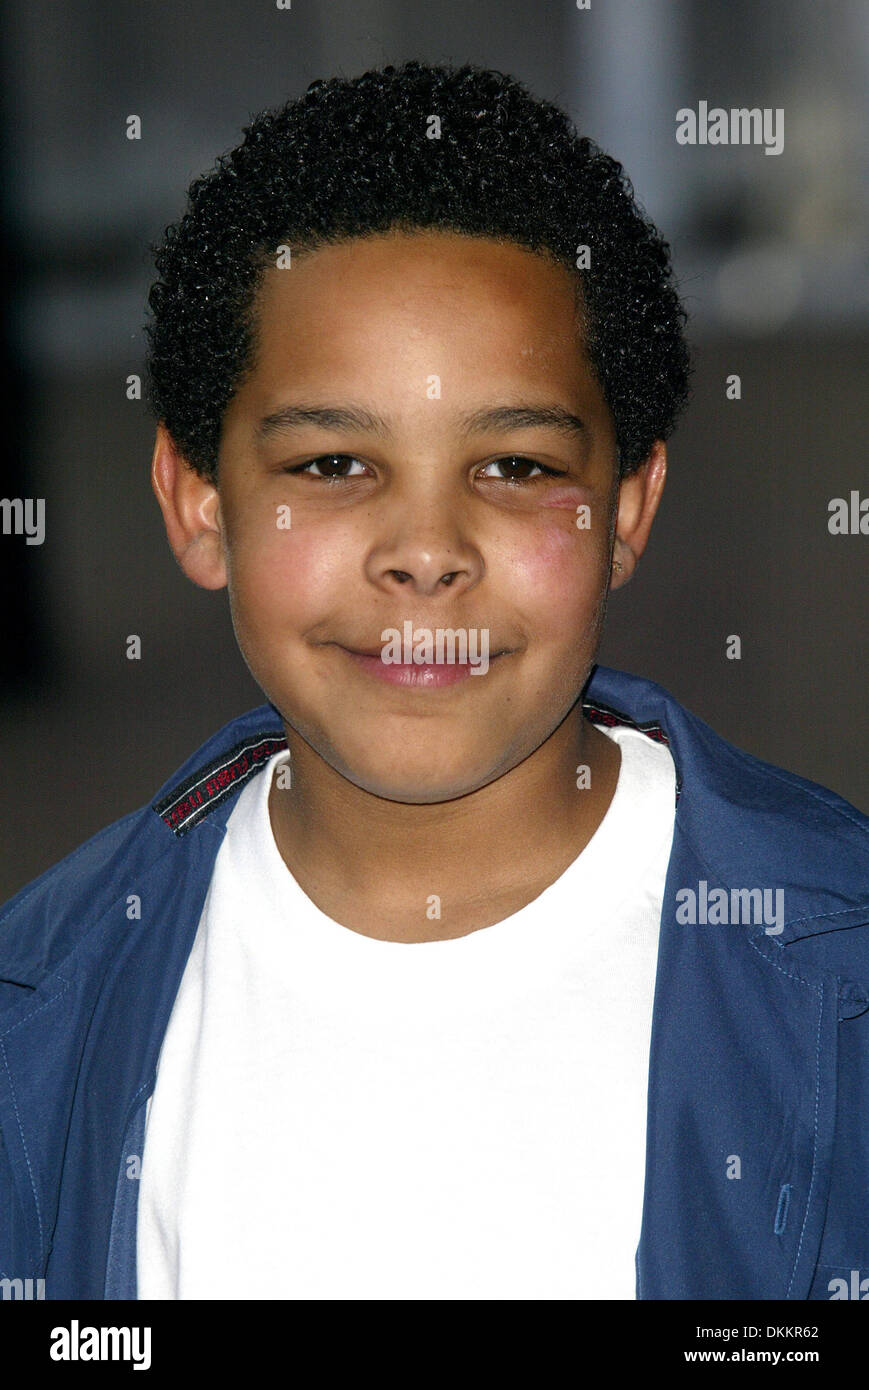 OMERO MUMBA.ACTOR & BROTHER OF SAMANTHA.ONDON, ENGL.THE ODEON, LEICESTER SQUARE, L.26/06/2002.DI2897. Stock Photo